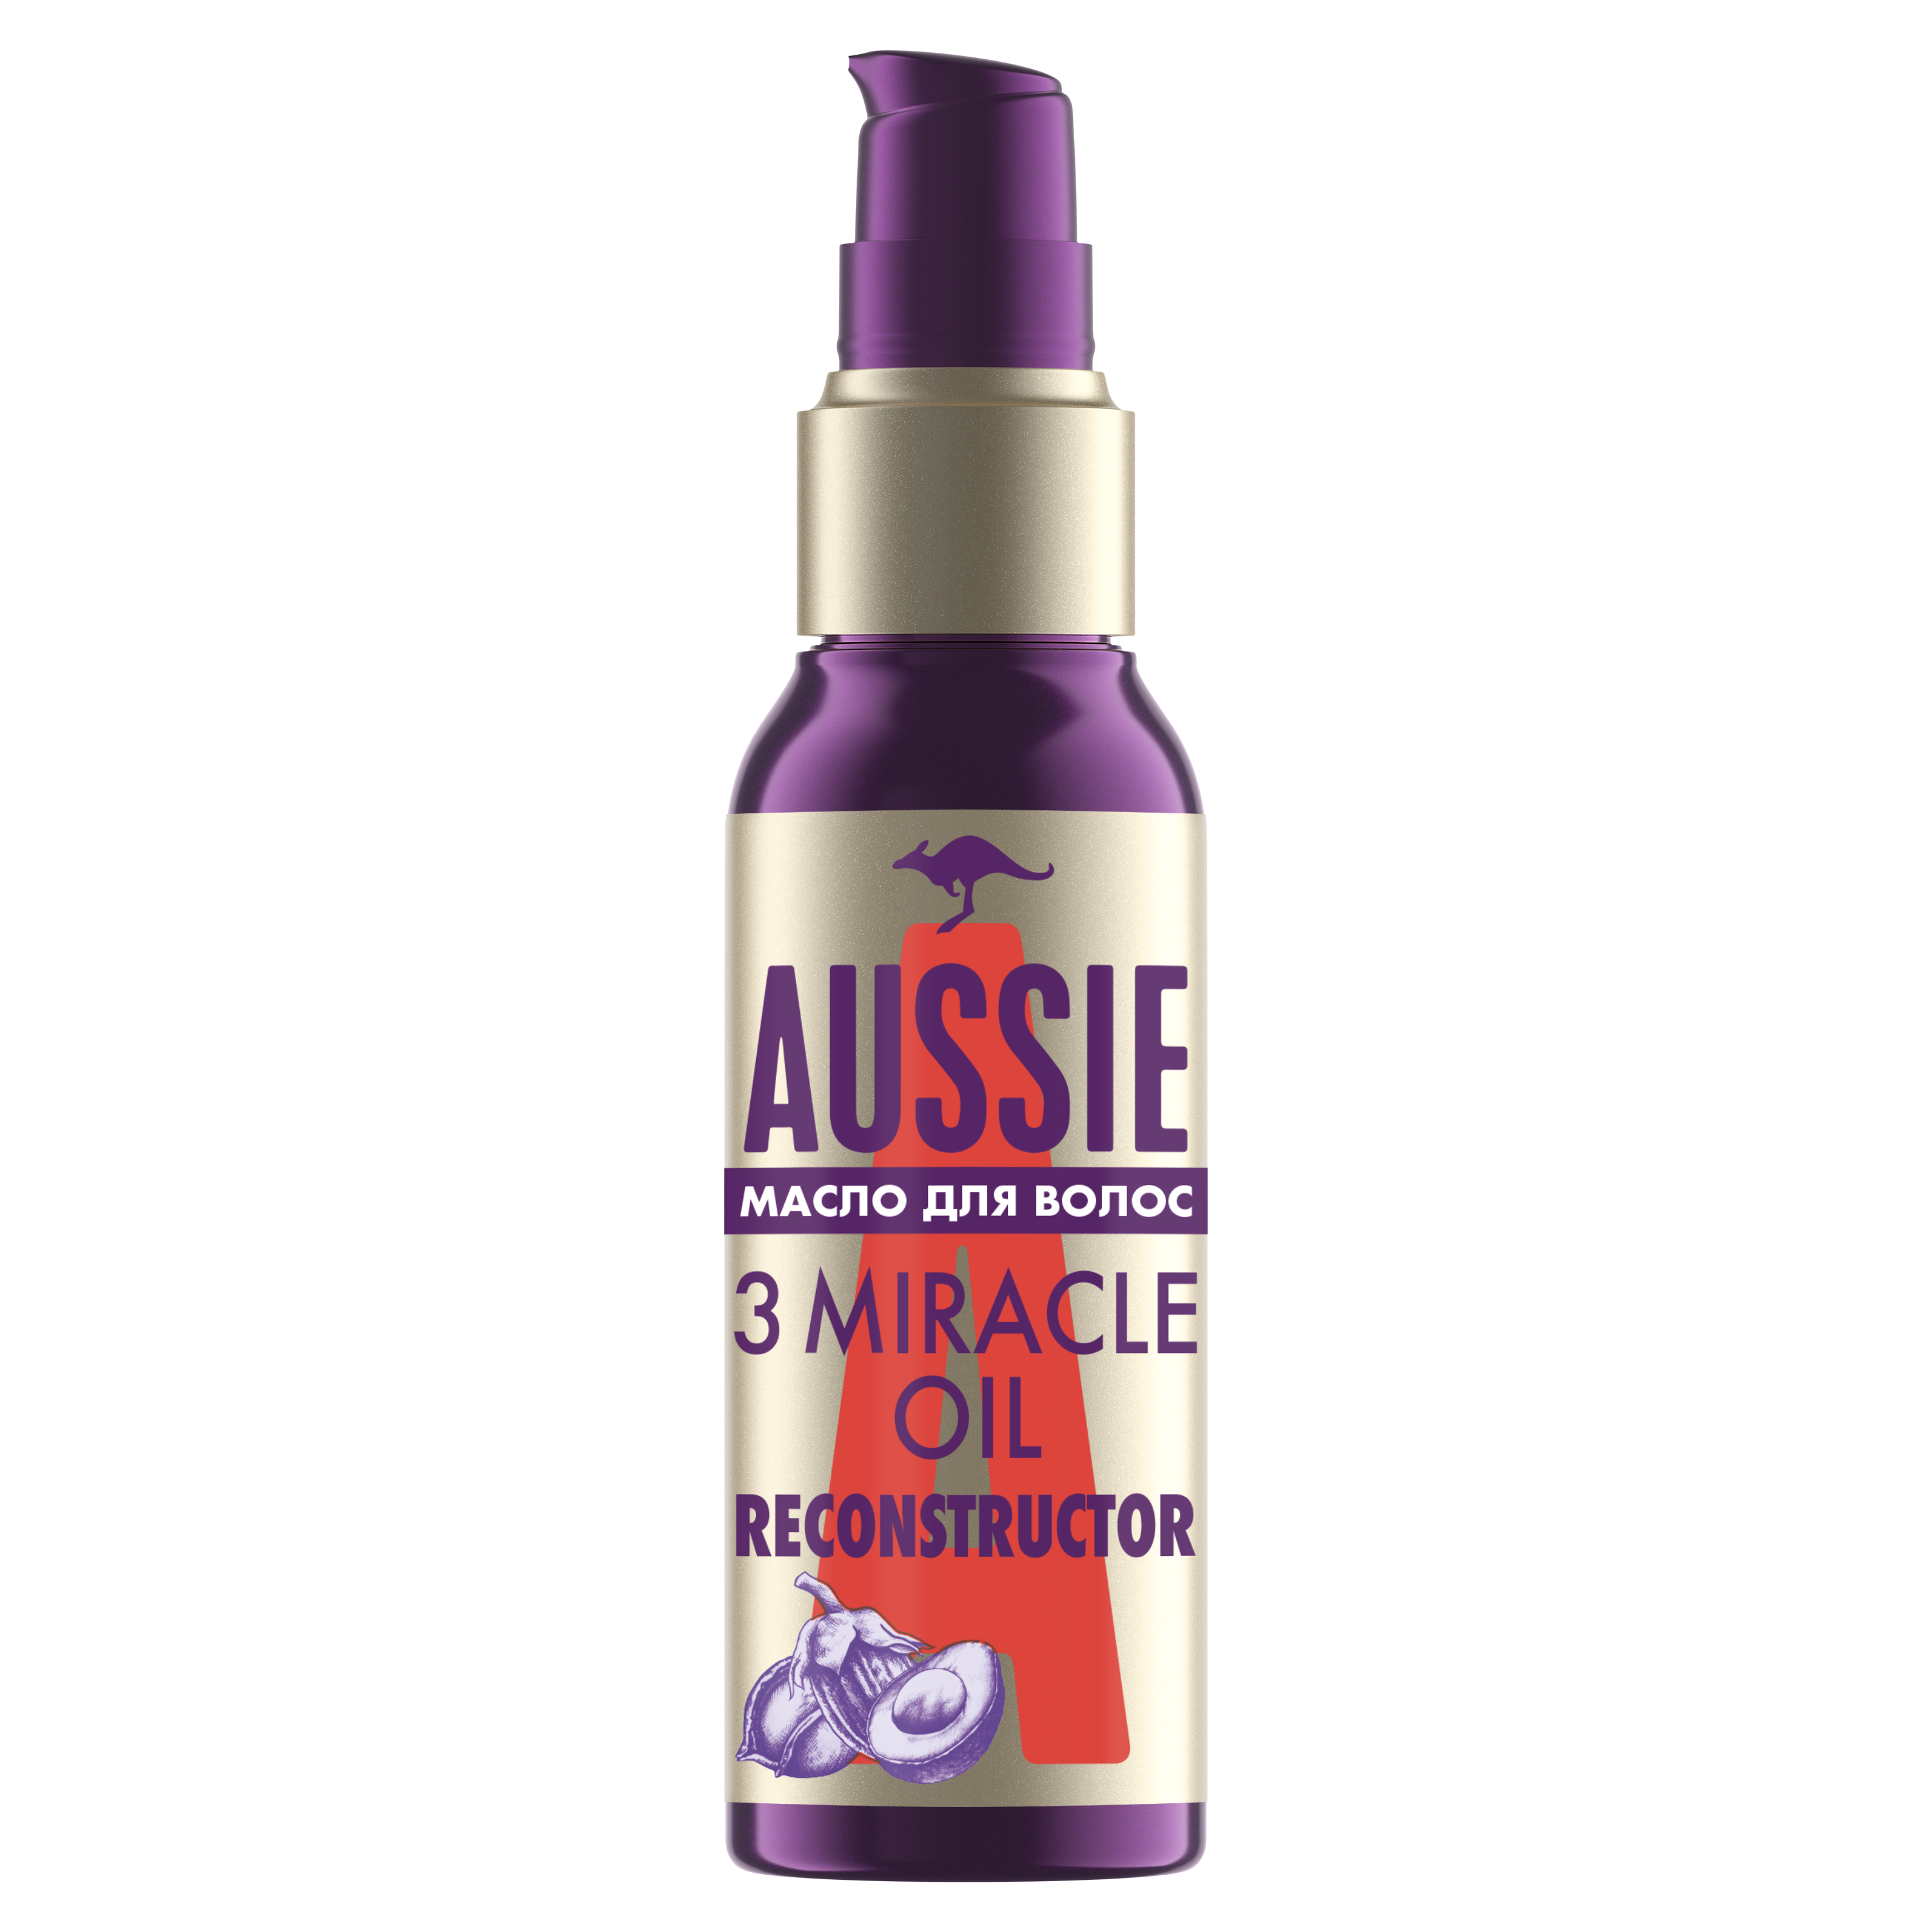 Масло для волос Aussie 3 Miracle Oil Reconstructor, 100 мл - фото 1